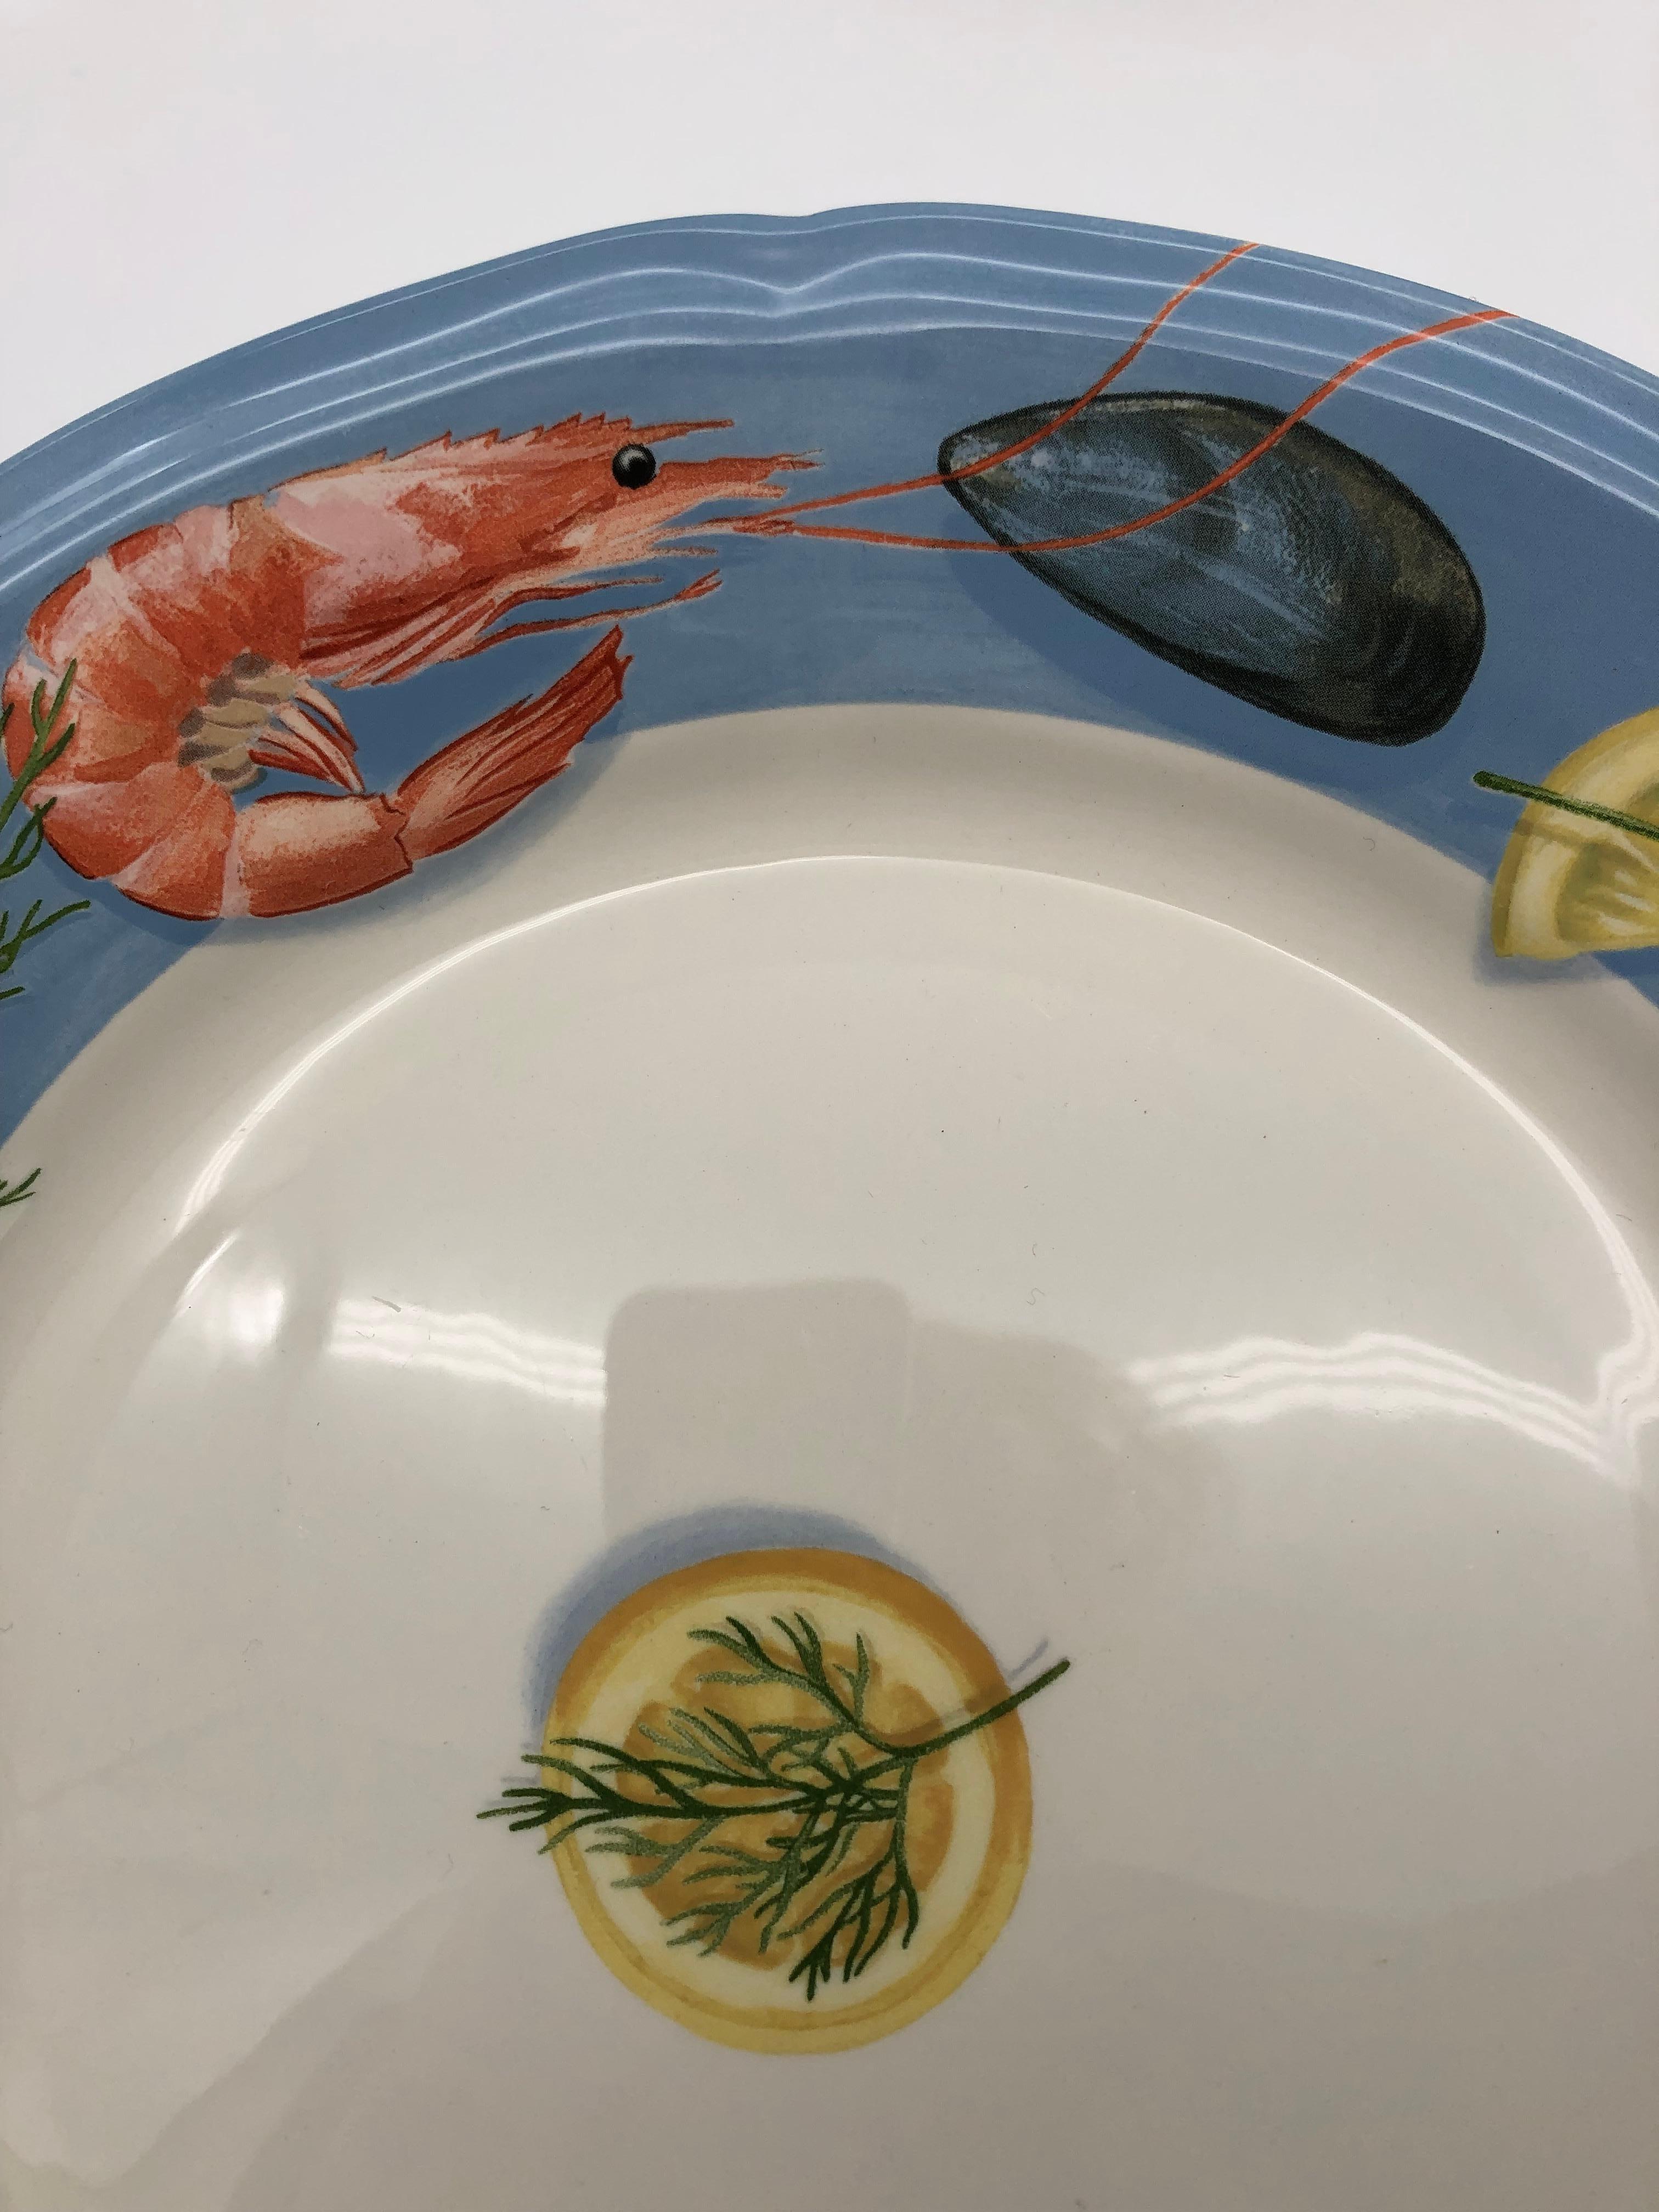 Original Belle-Île Seafood dinner plates with gorgeous graphics of mussels, lemons, lobster and seaweed.

Can be purchased in a set of 9 for 200 Euro or 30 Euro/piece.
Perfect for every plate collection.